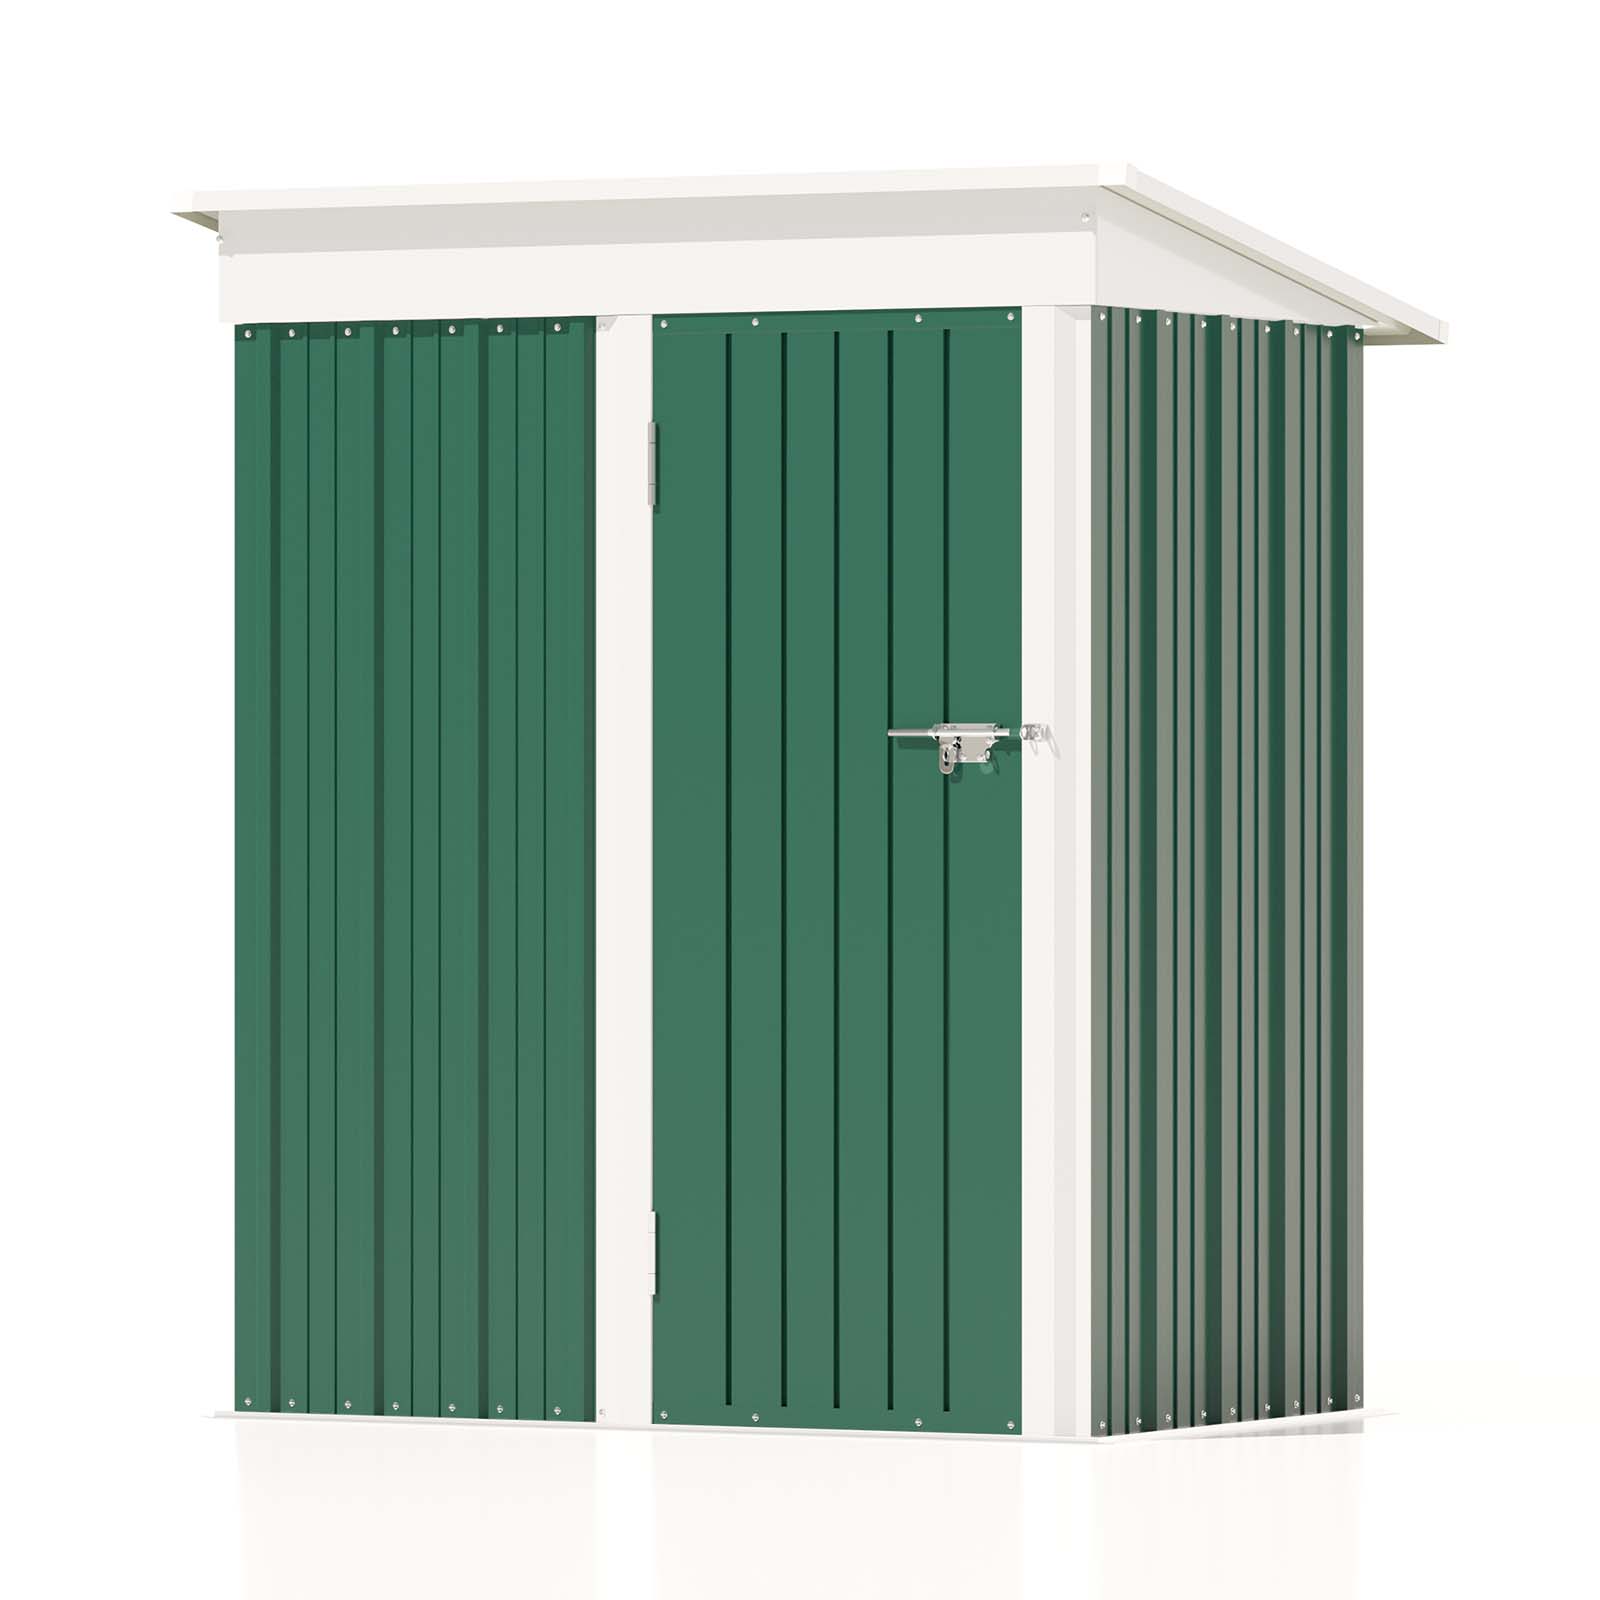 Patiowell 5x3 Metal Shed-Bottle Green